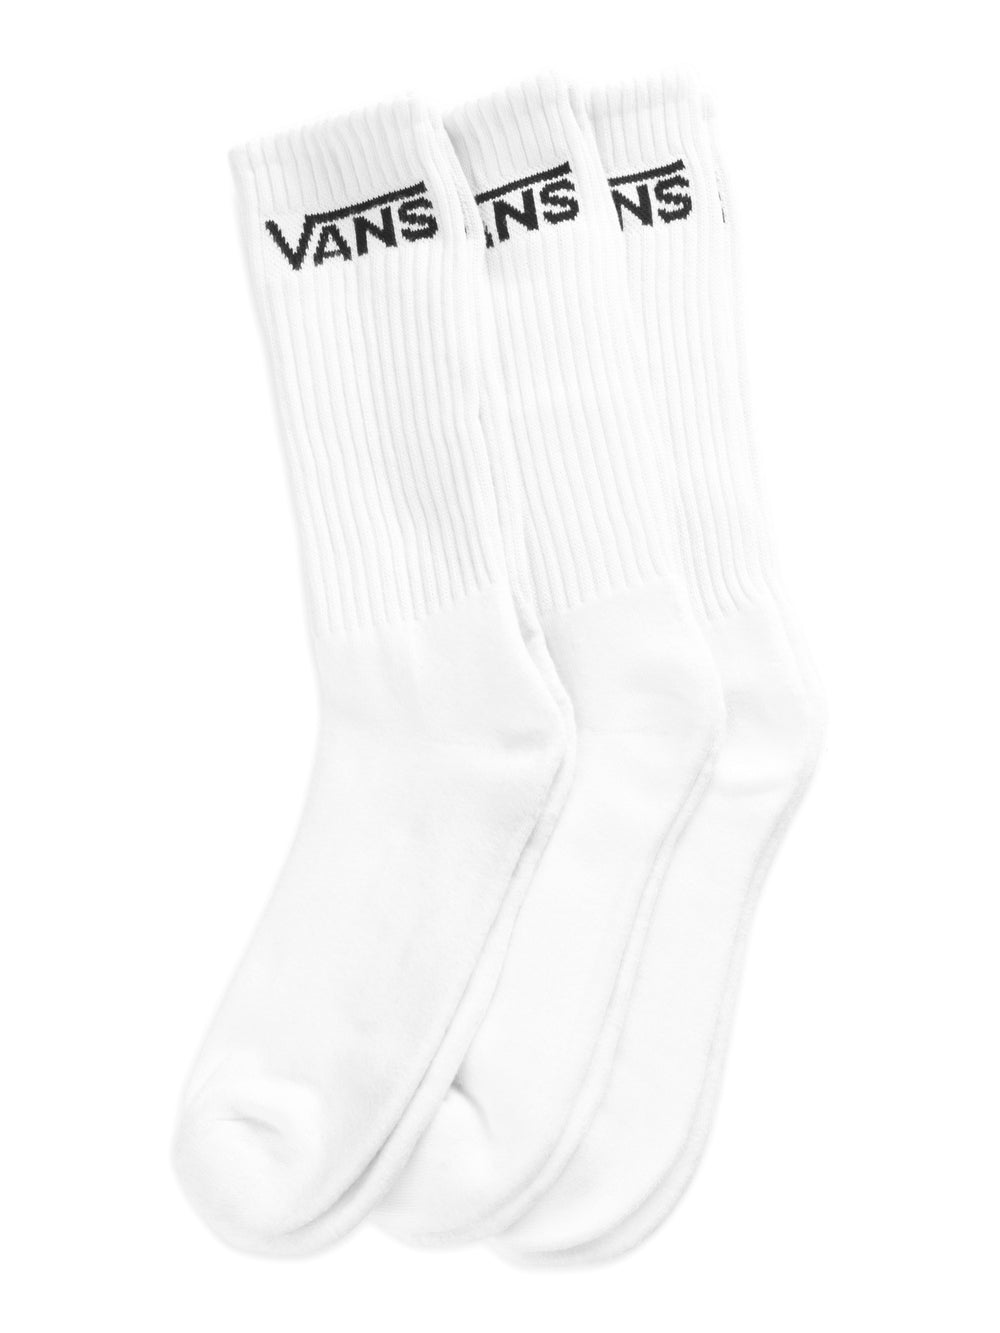 VANS CLASSIC CREW Footwear 3 SOCKS Collective Boathouse | PACK